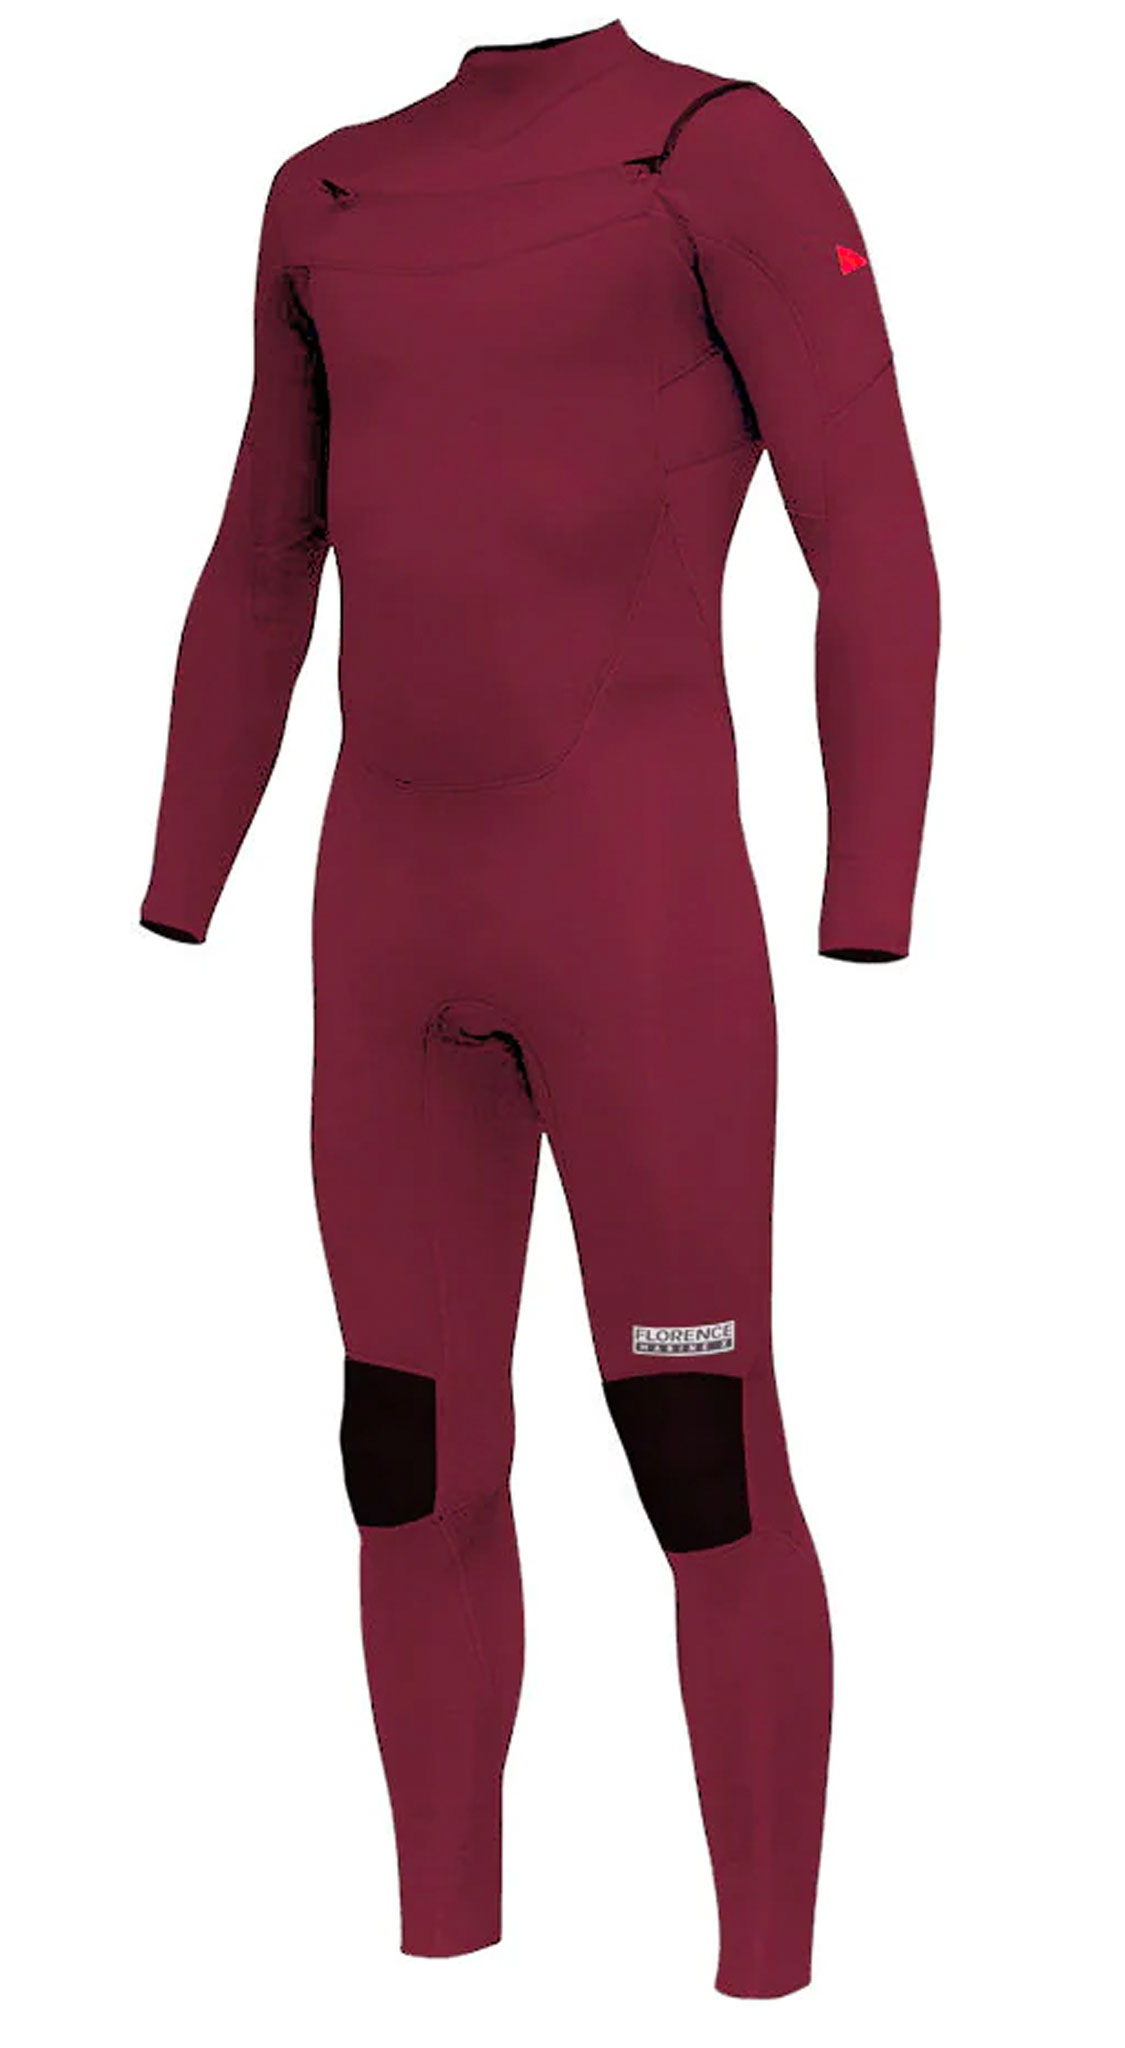 Florence Marine X Wetsuit Review